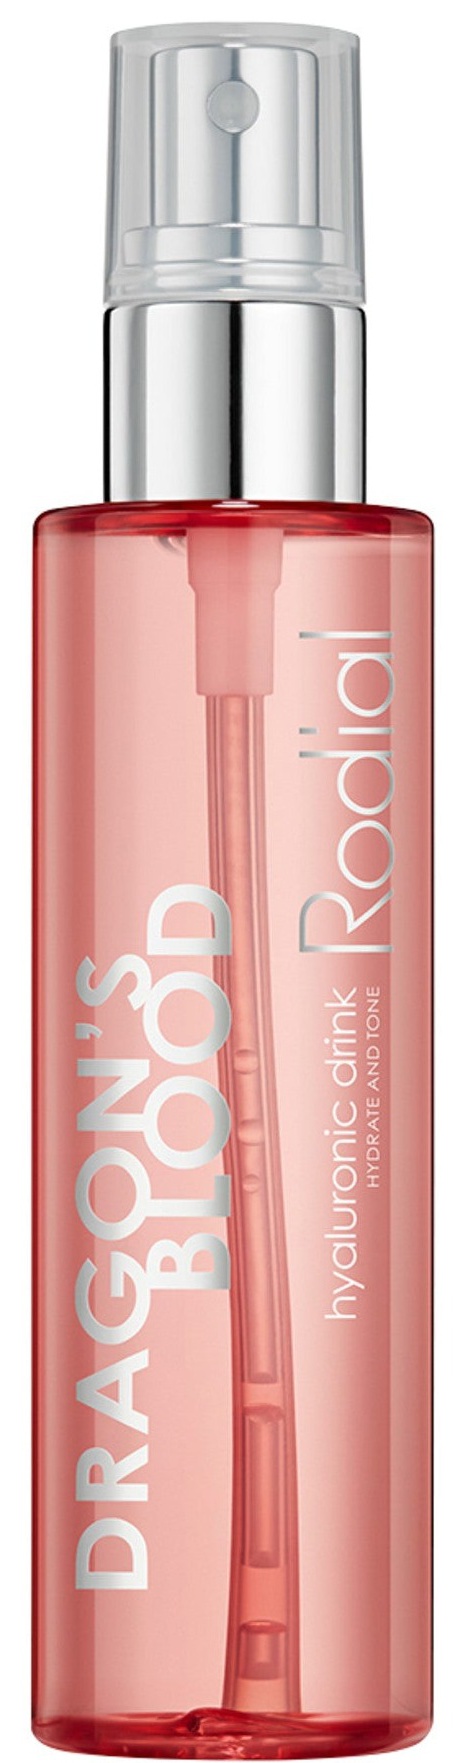 Rodial Dragon's Blook Hyaluronic Drink